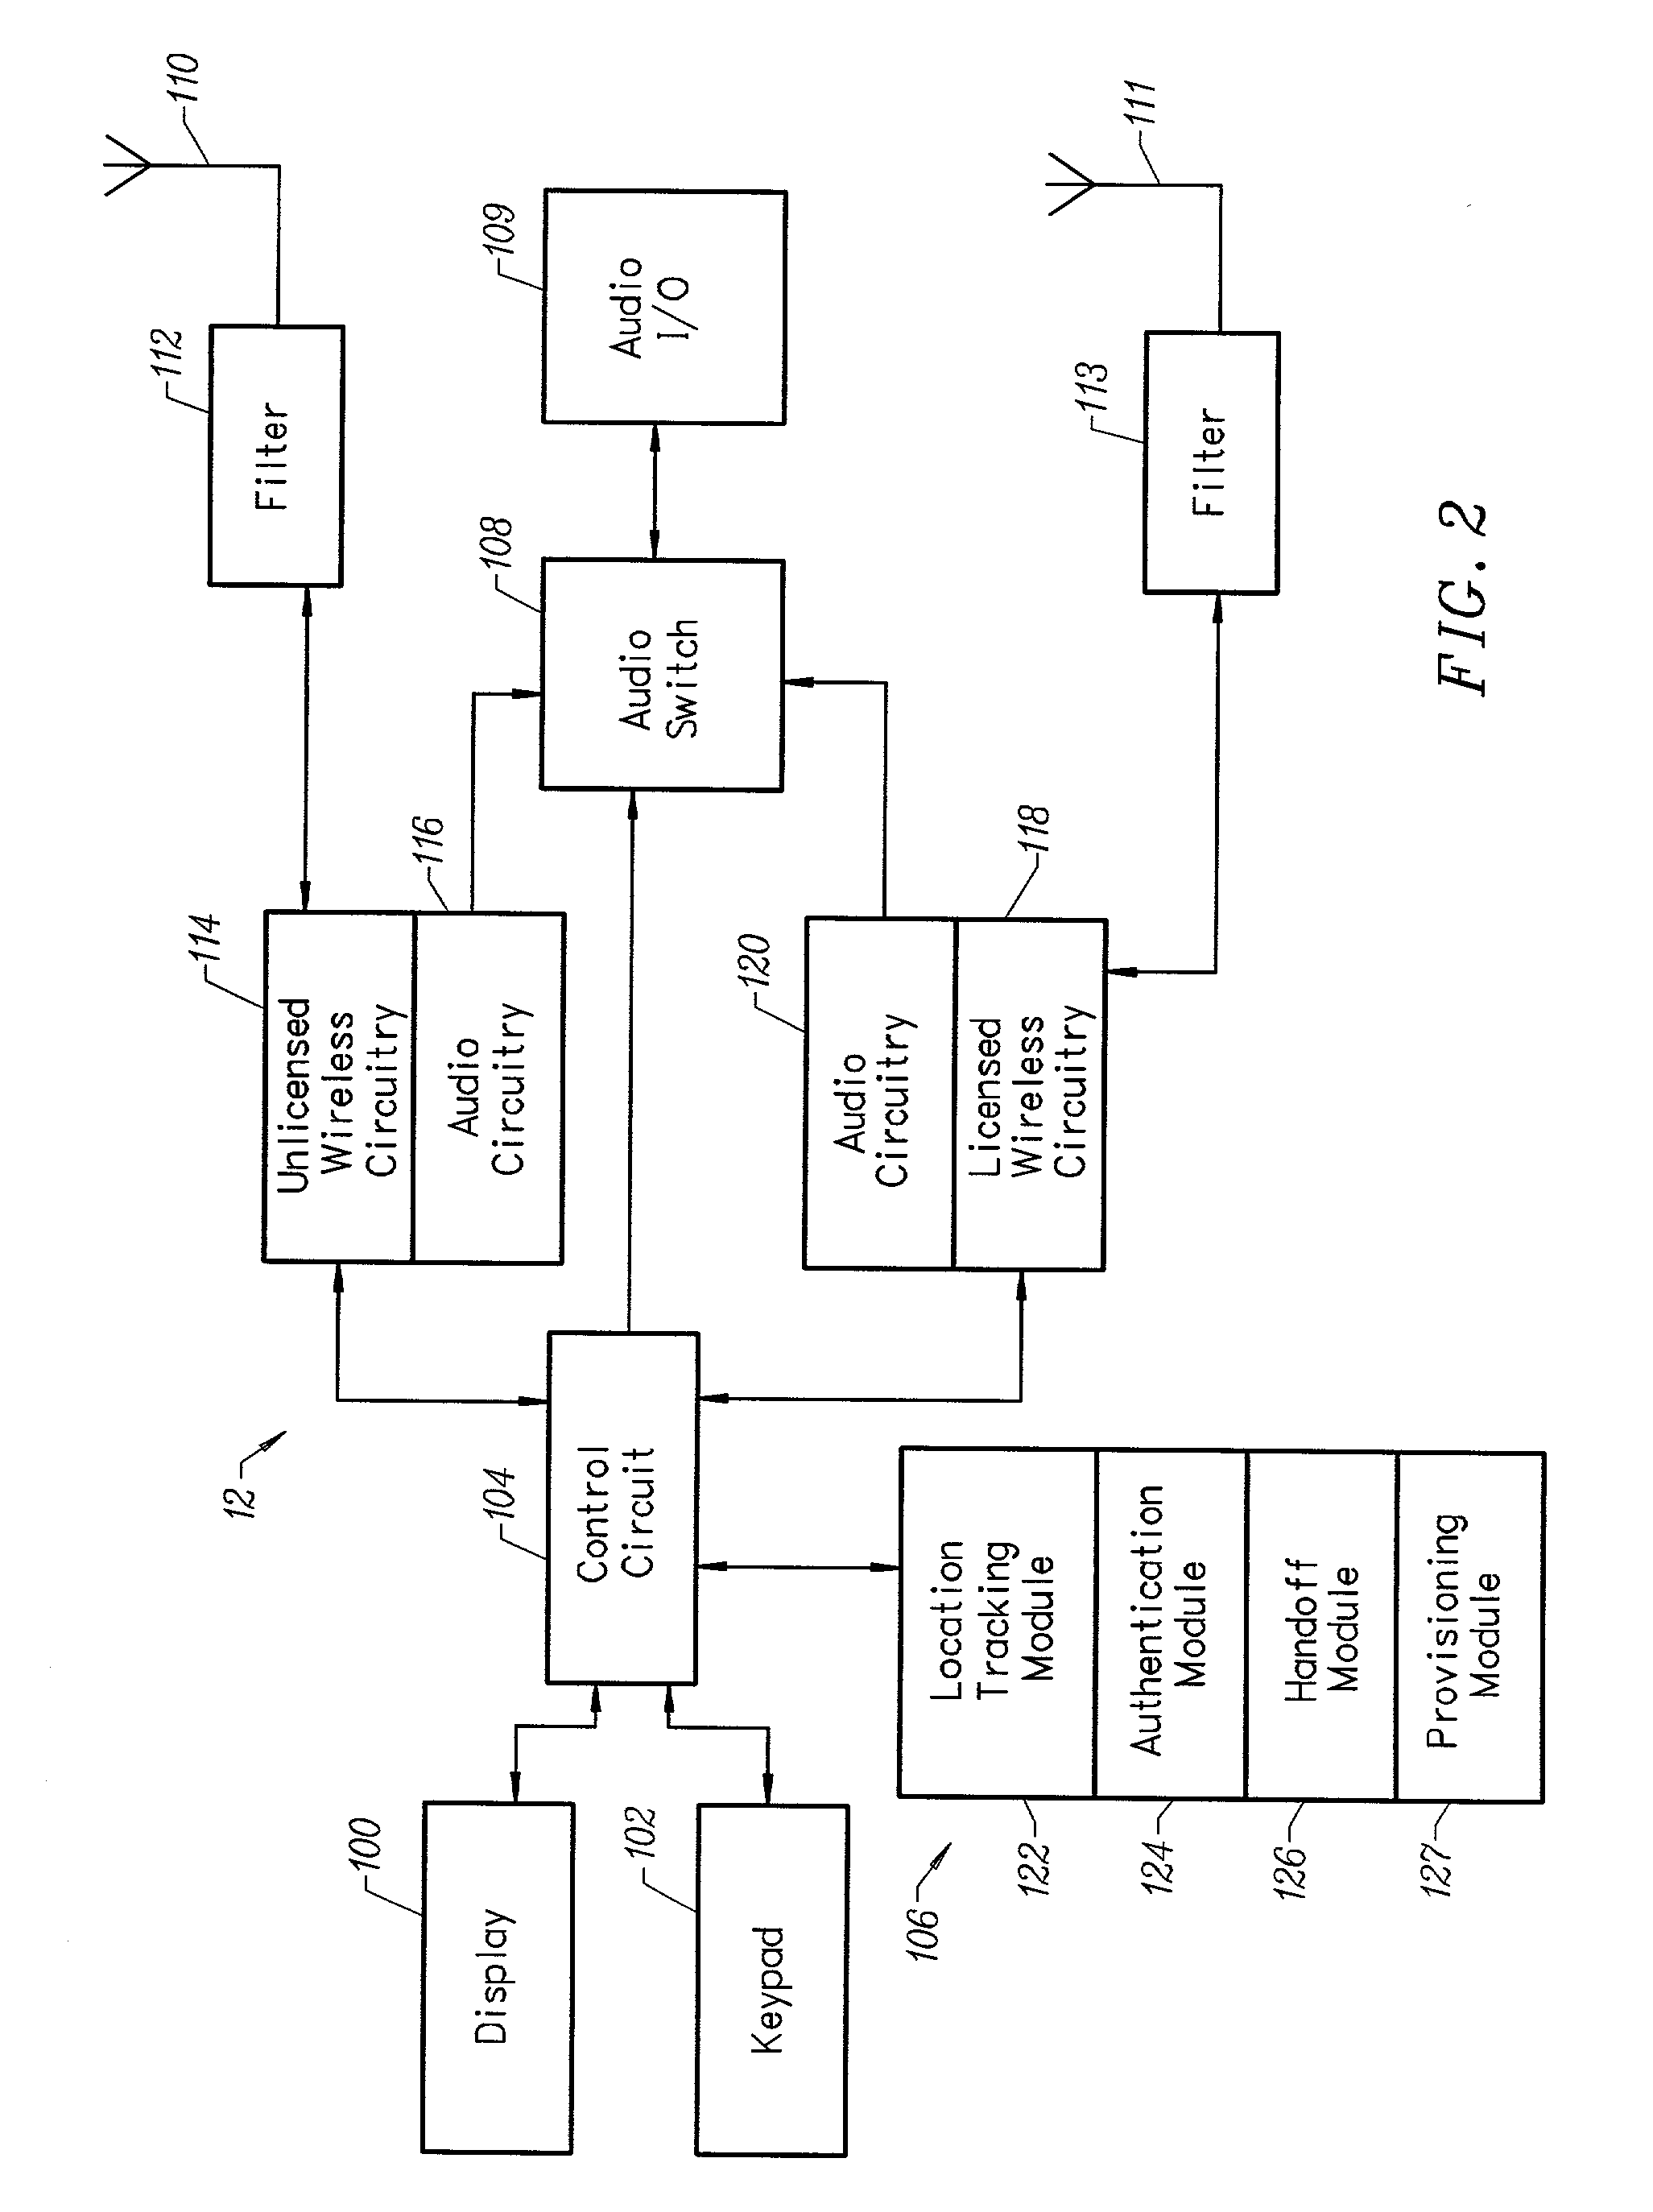 Method for authenticating access to an unlicensed wireless communications system using a licensed wireless communications system authentication process